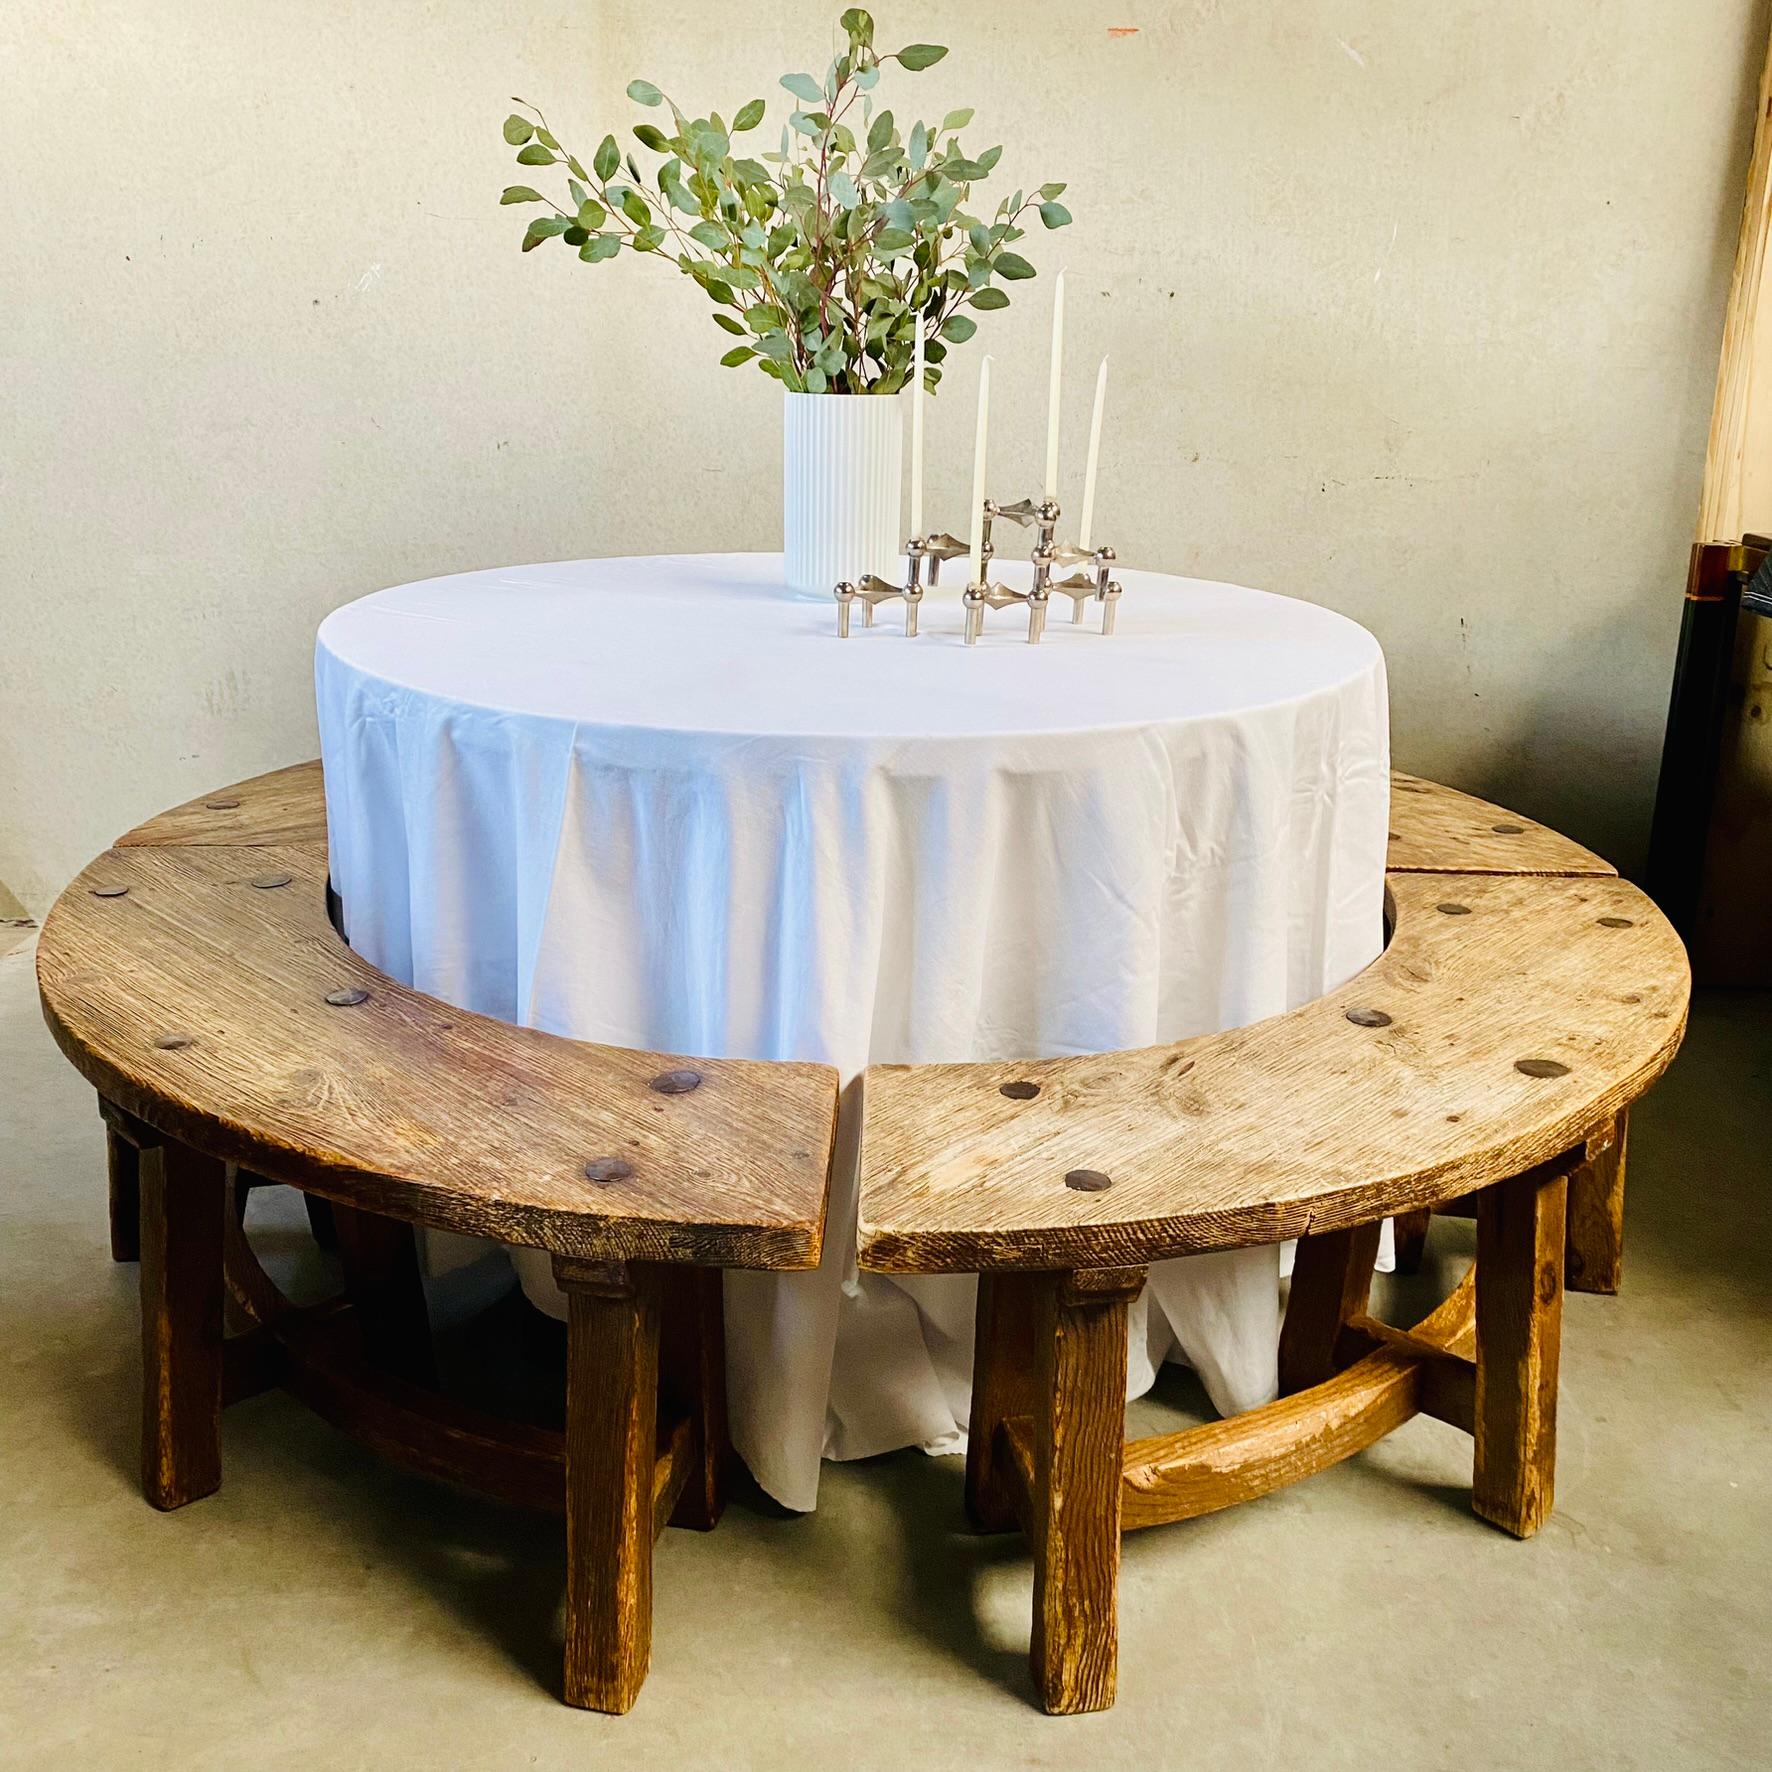 Elevate Your Dining Space with a Solid Oak Round Rustic Brutalist Wabi Sabi Dining Table Set from 1950s France

Introduce timeless elegance and rustic charm to your dining area with our exquisite Solid Oak Round Rustic Brutalist Wabi Sabi Dining